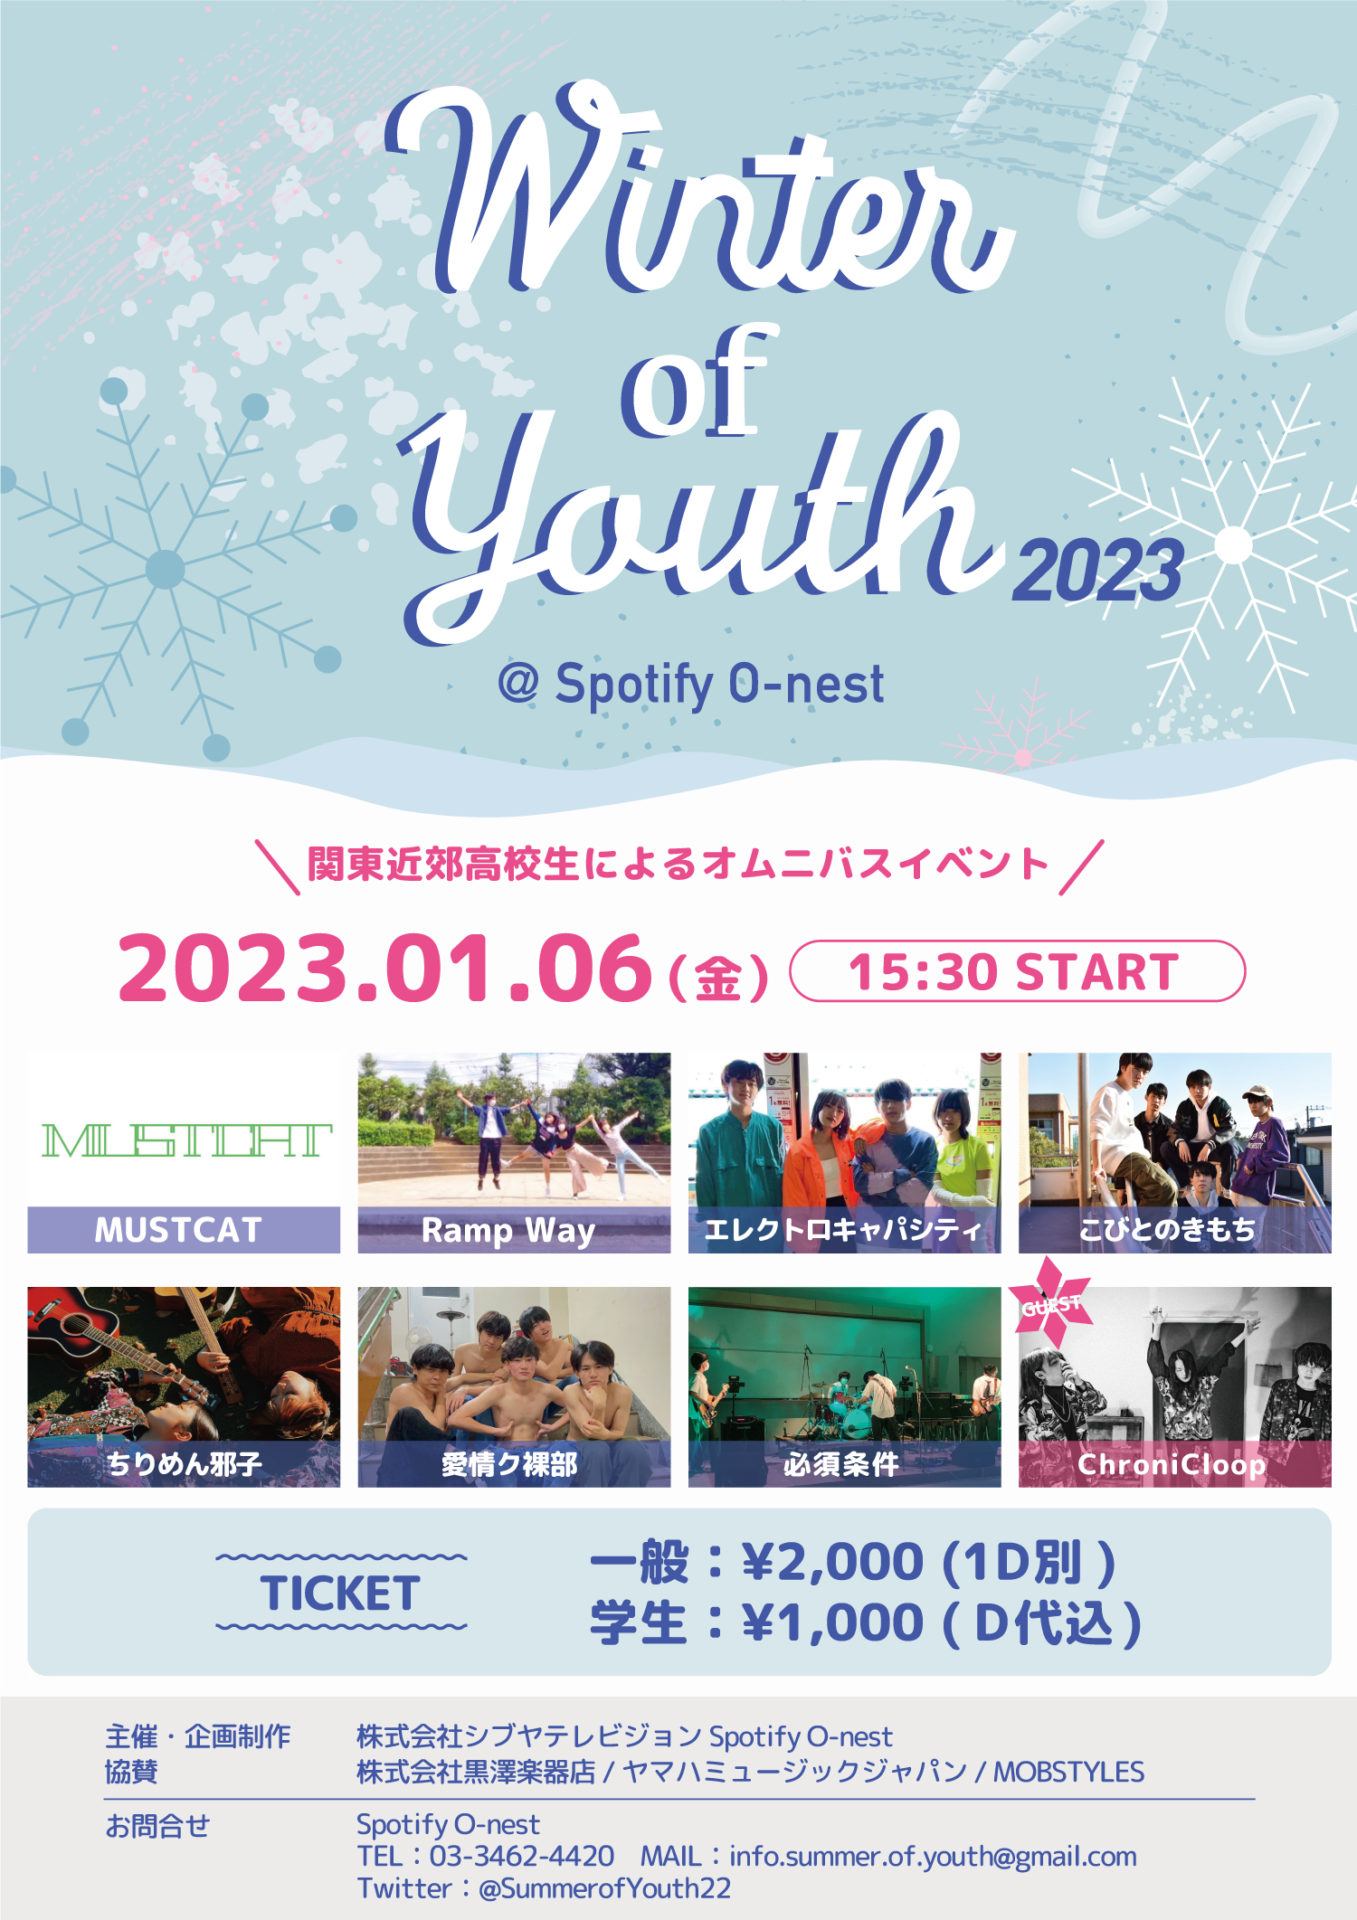 Winter of Youth 2023